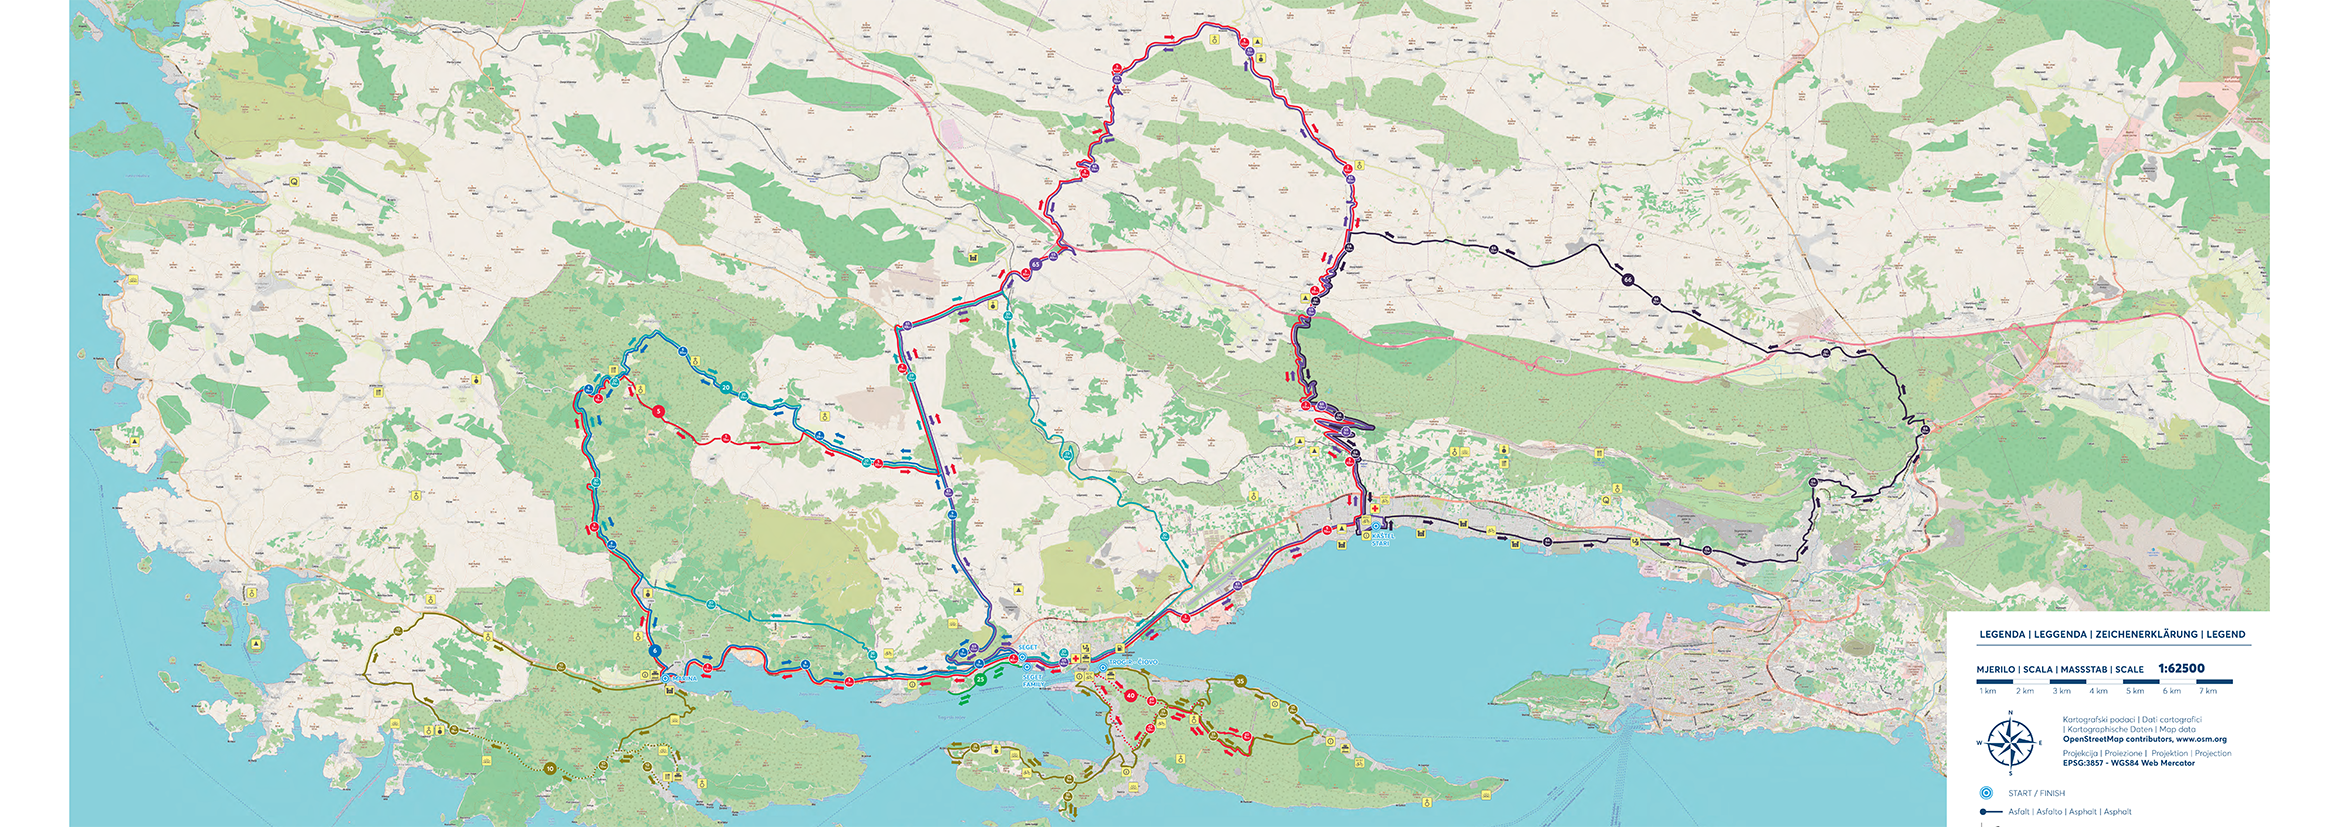 Riviera Okrug Trogir - Road & Family routes map of the island of Čiovo